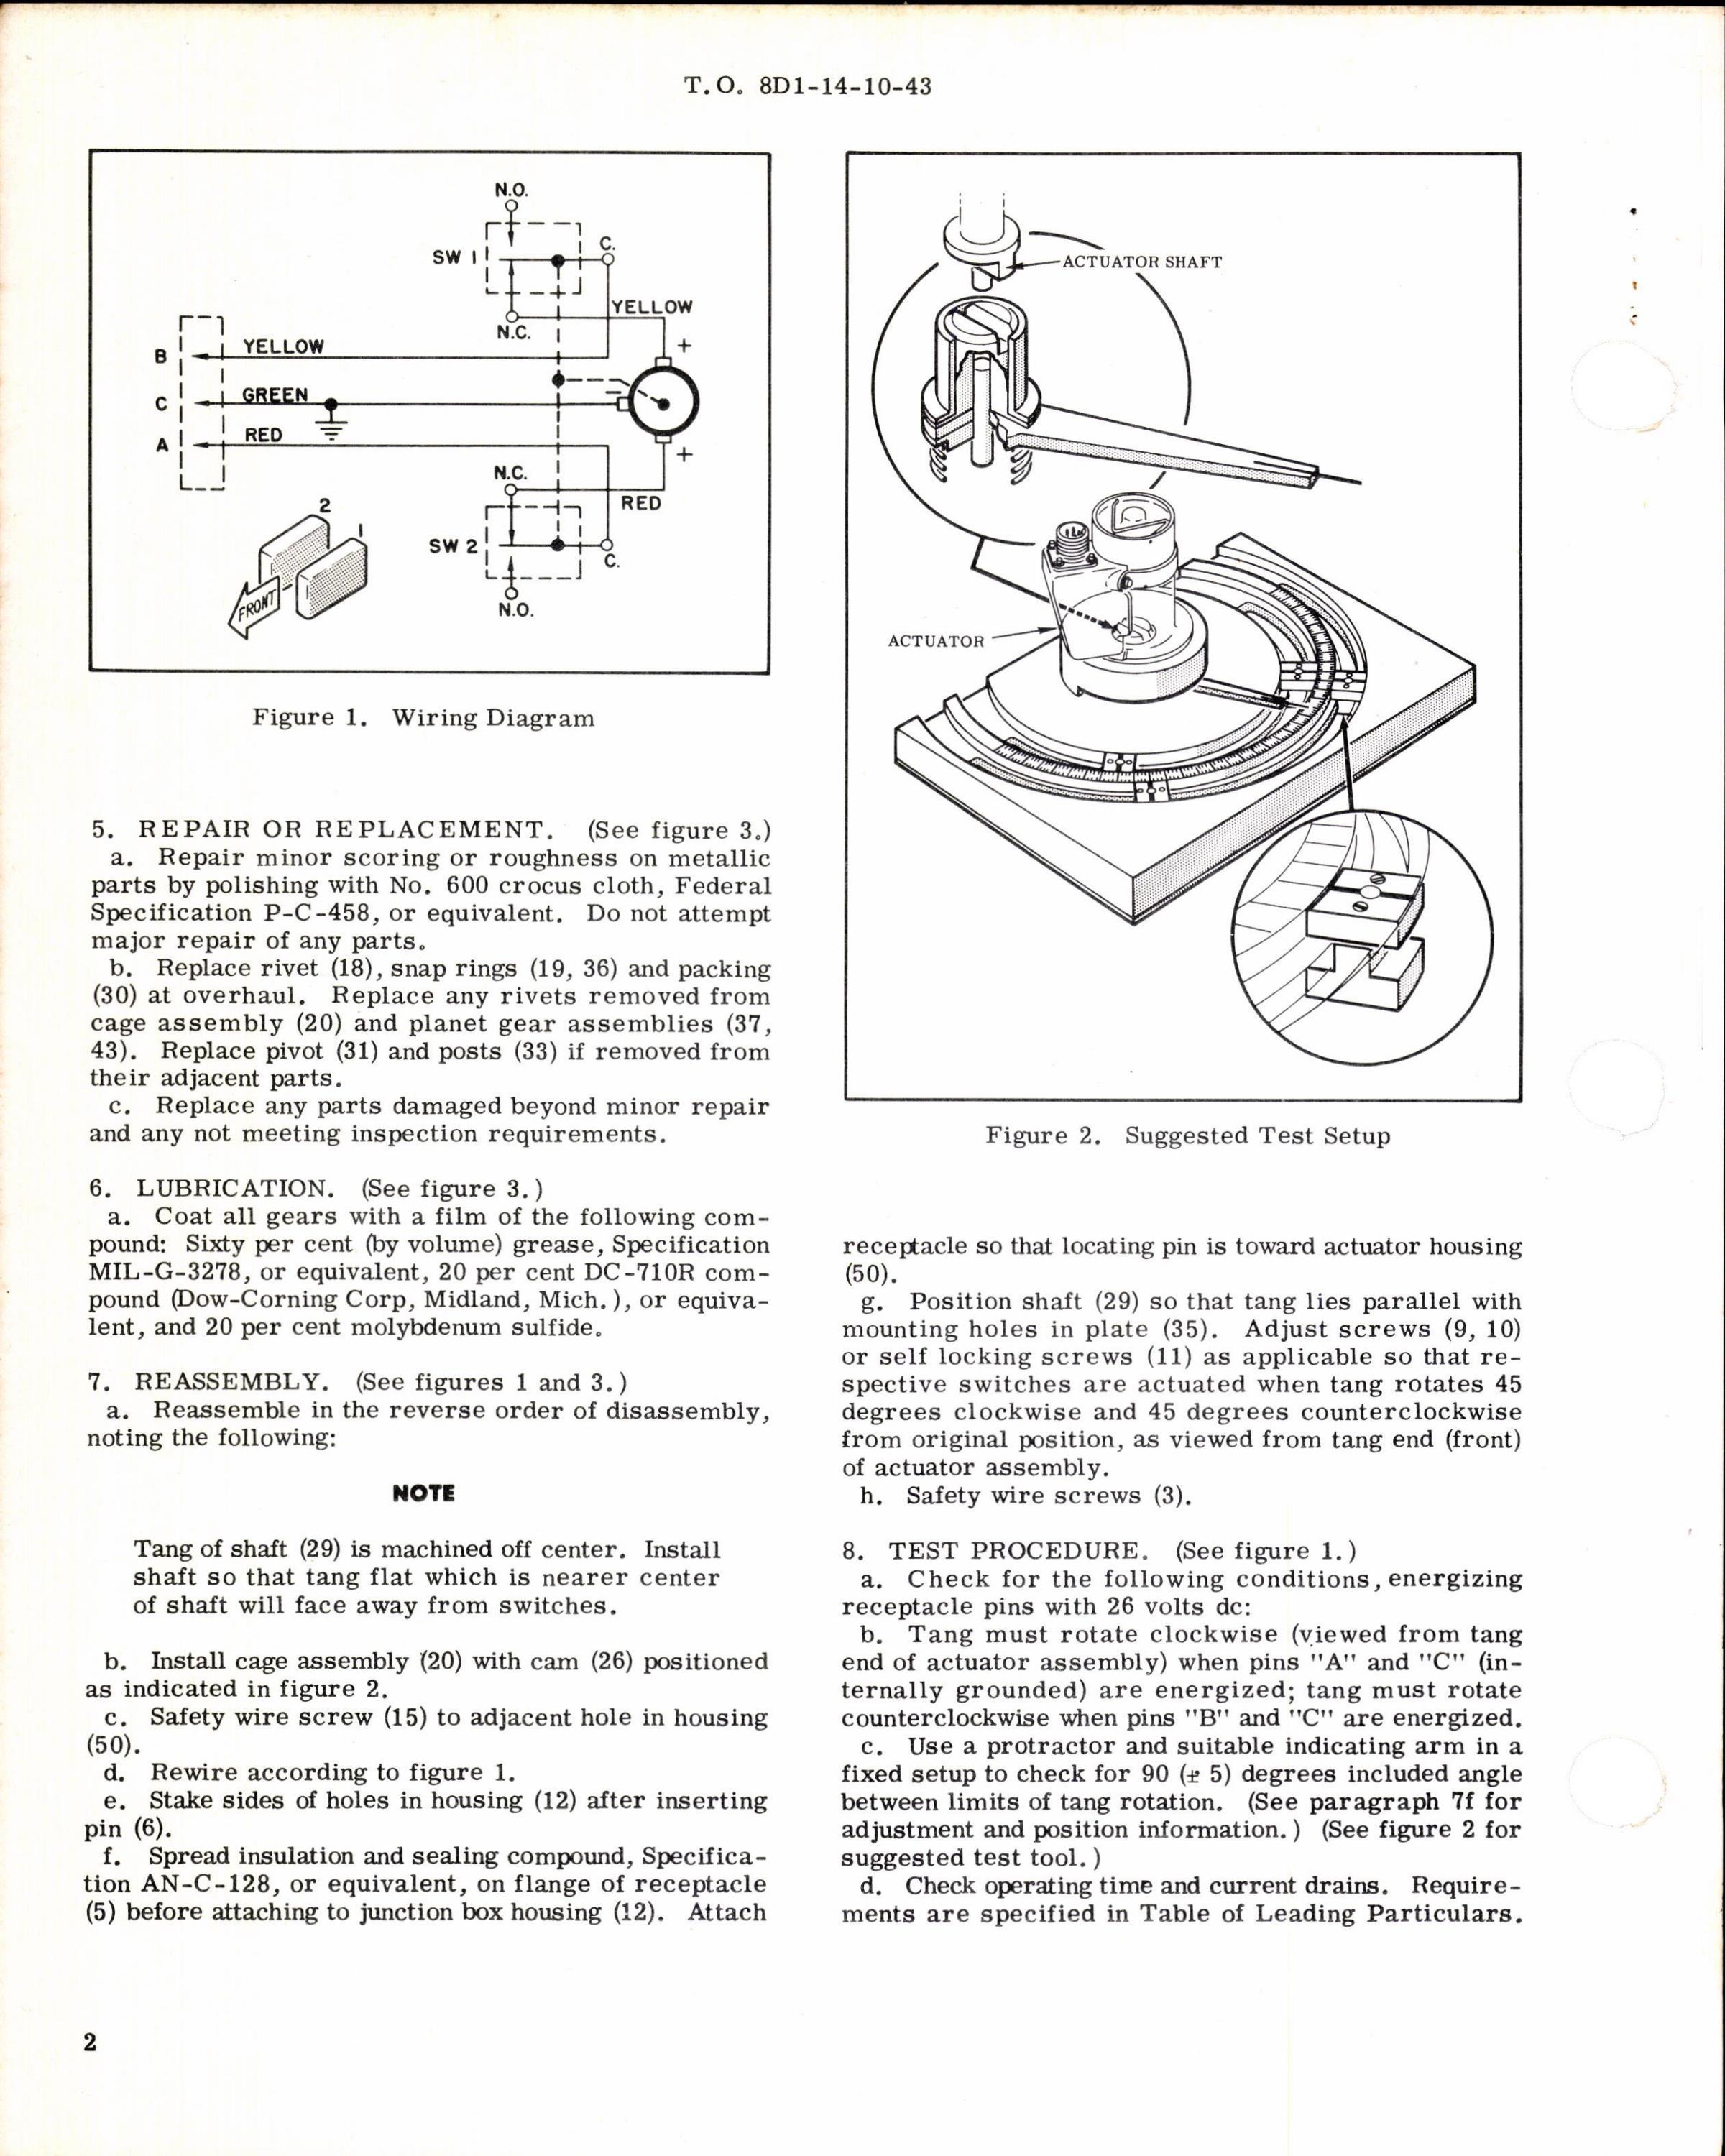 Sample page 2 from AirCorps Library document: Instructions w Parts Breakdown for Actuator Assembly Part 106690